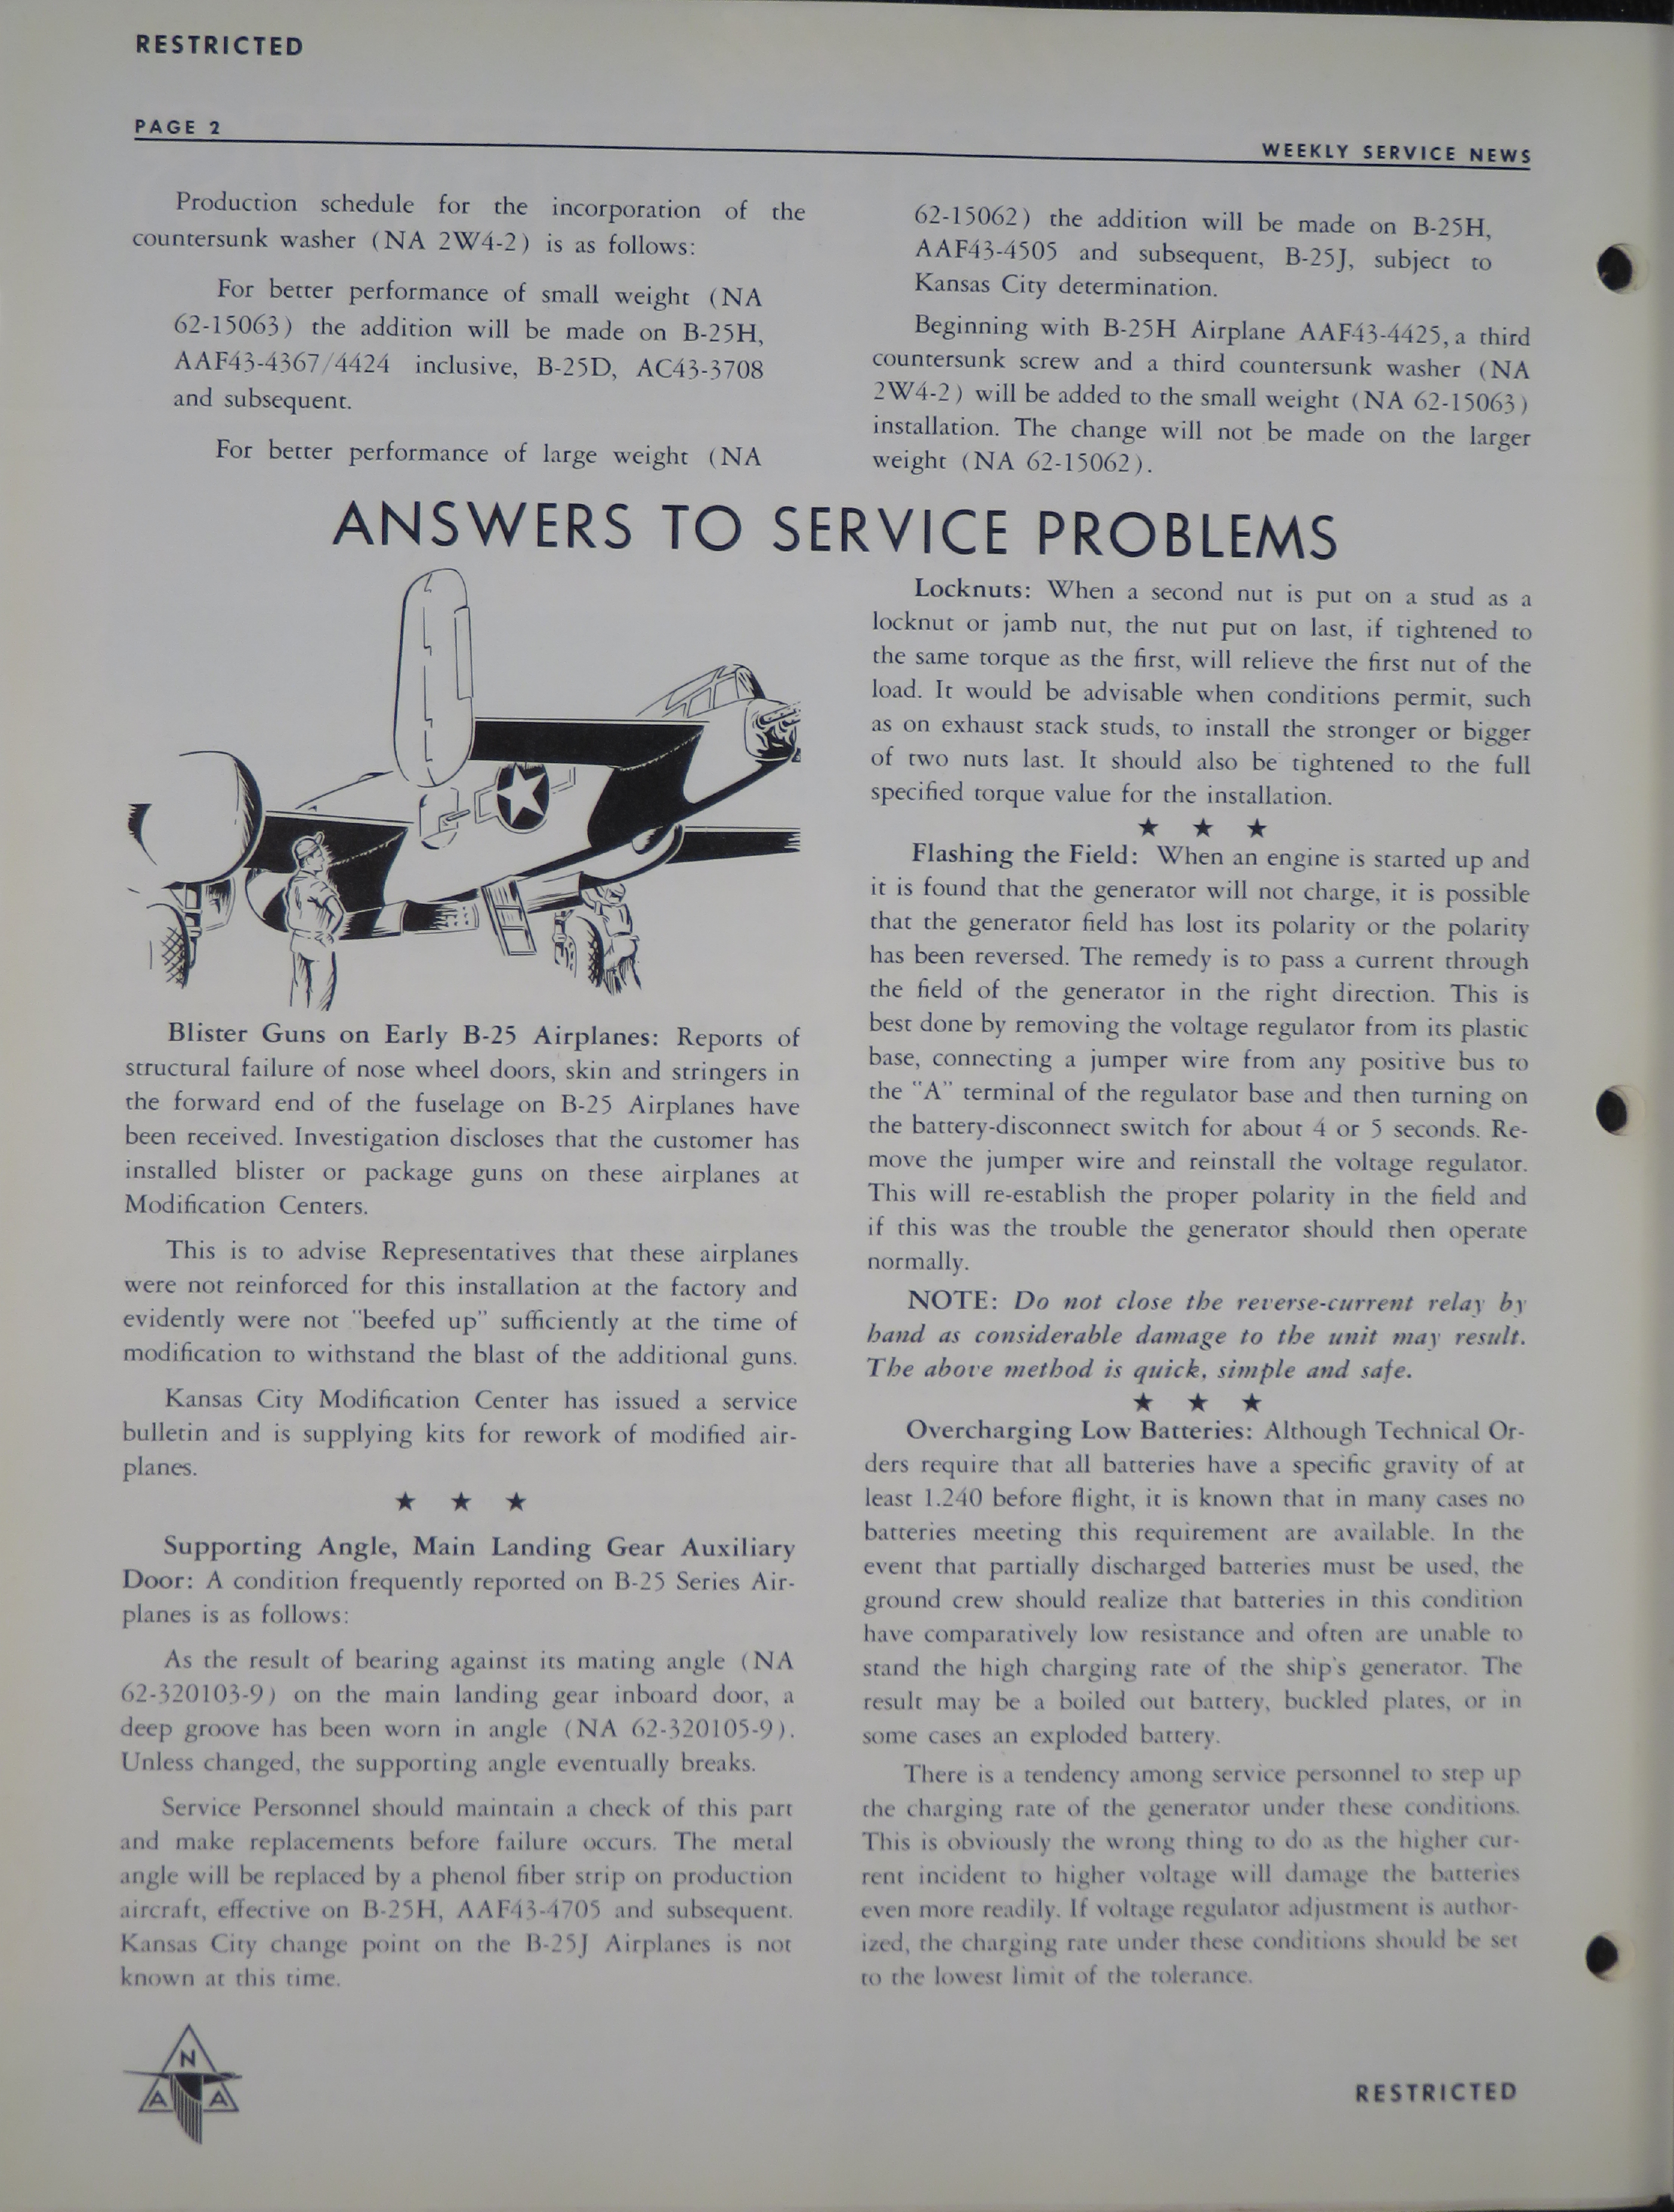 Sample page 2 from AirCorps Library document: Volume 2, No. 17 - Weekly Service News